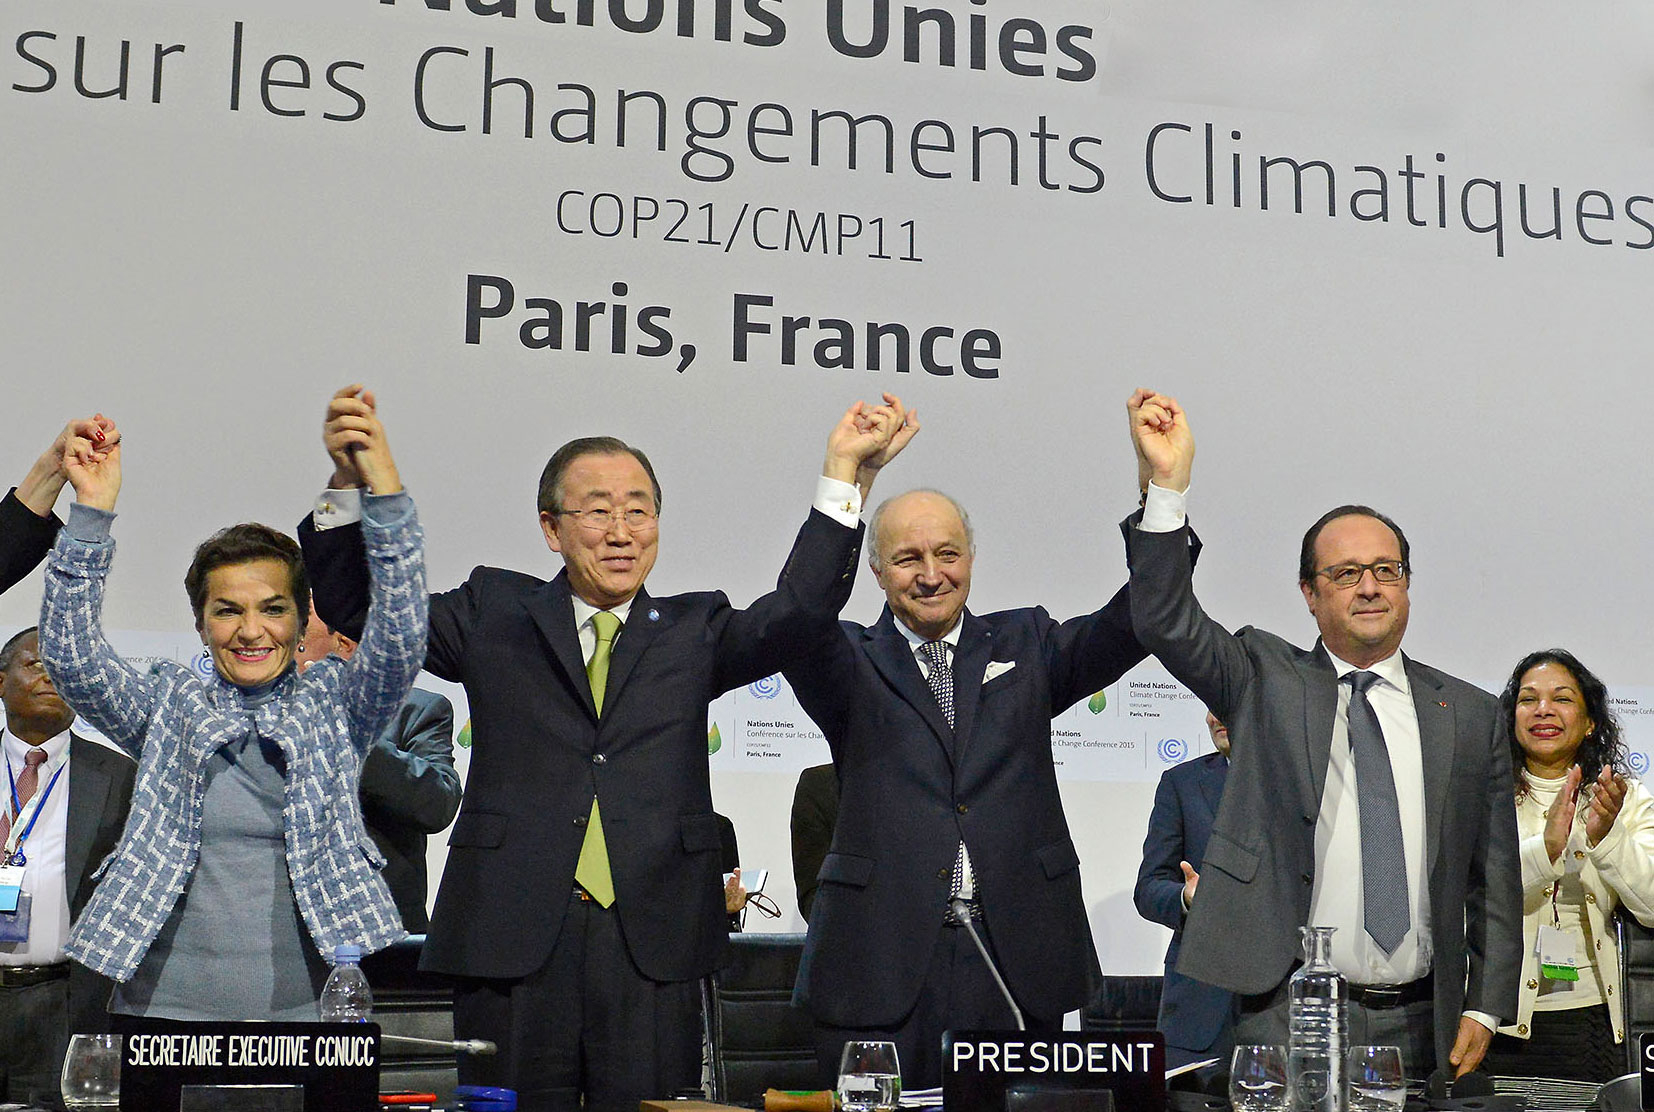 Climate Change Agreement 2015 Paris Our Values Our Future Club De Madrid Statement On Trump And